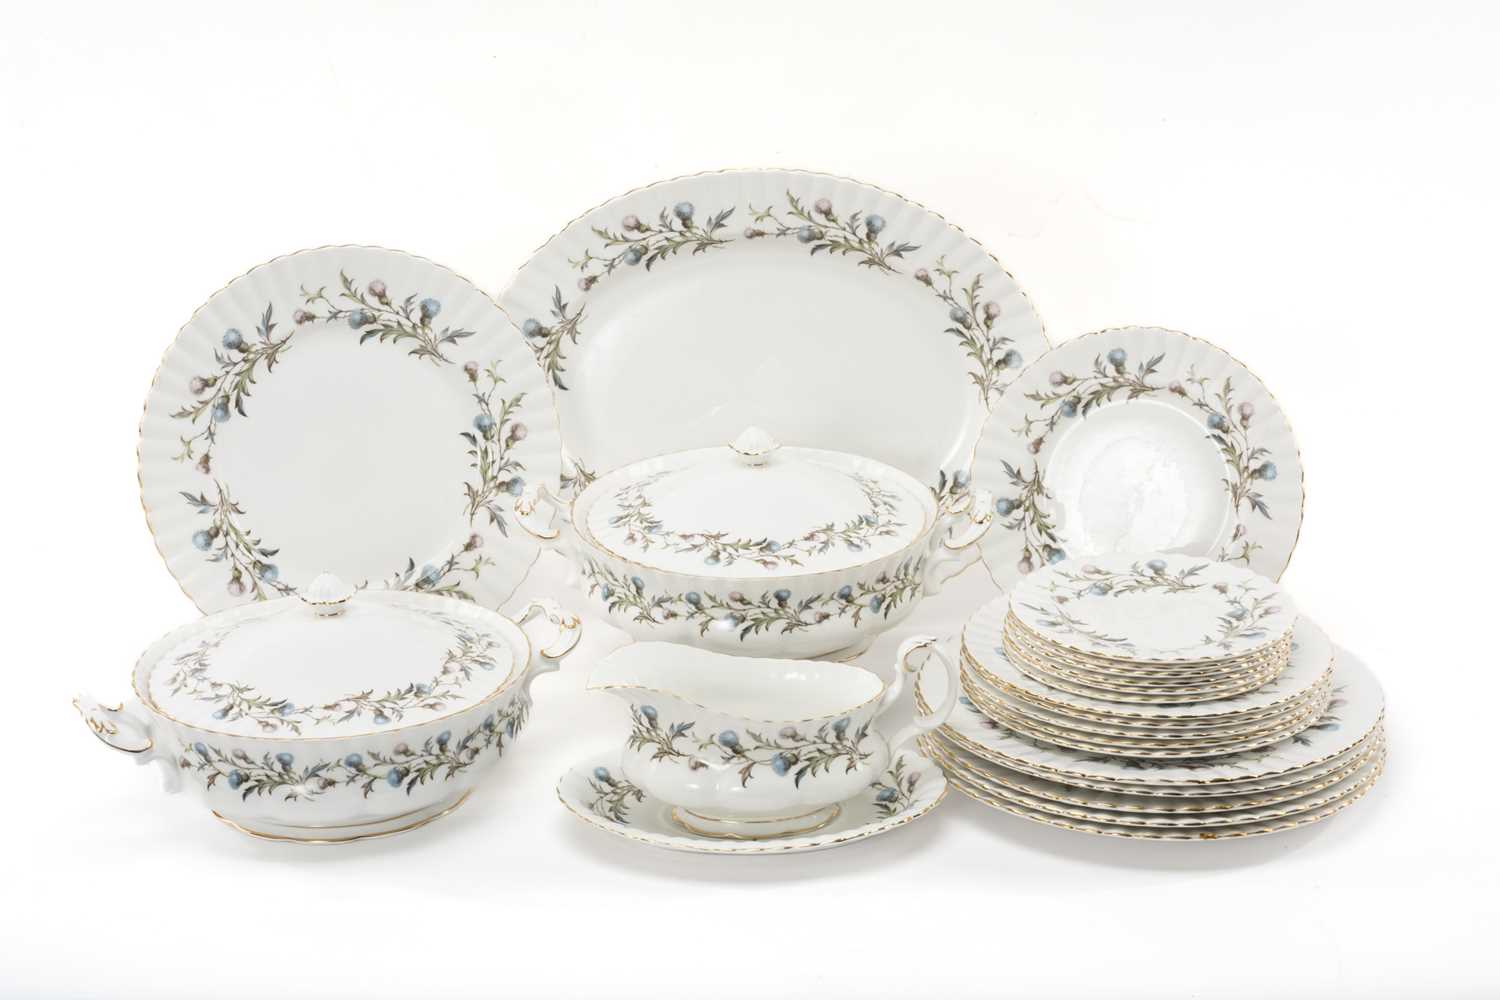 ROYAL ALBERT 'BRIGADOON' PATTERN BONE CHINA SERVICE, for six place setings, including tureens, sauce